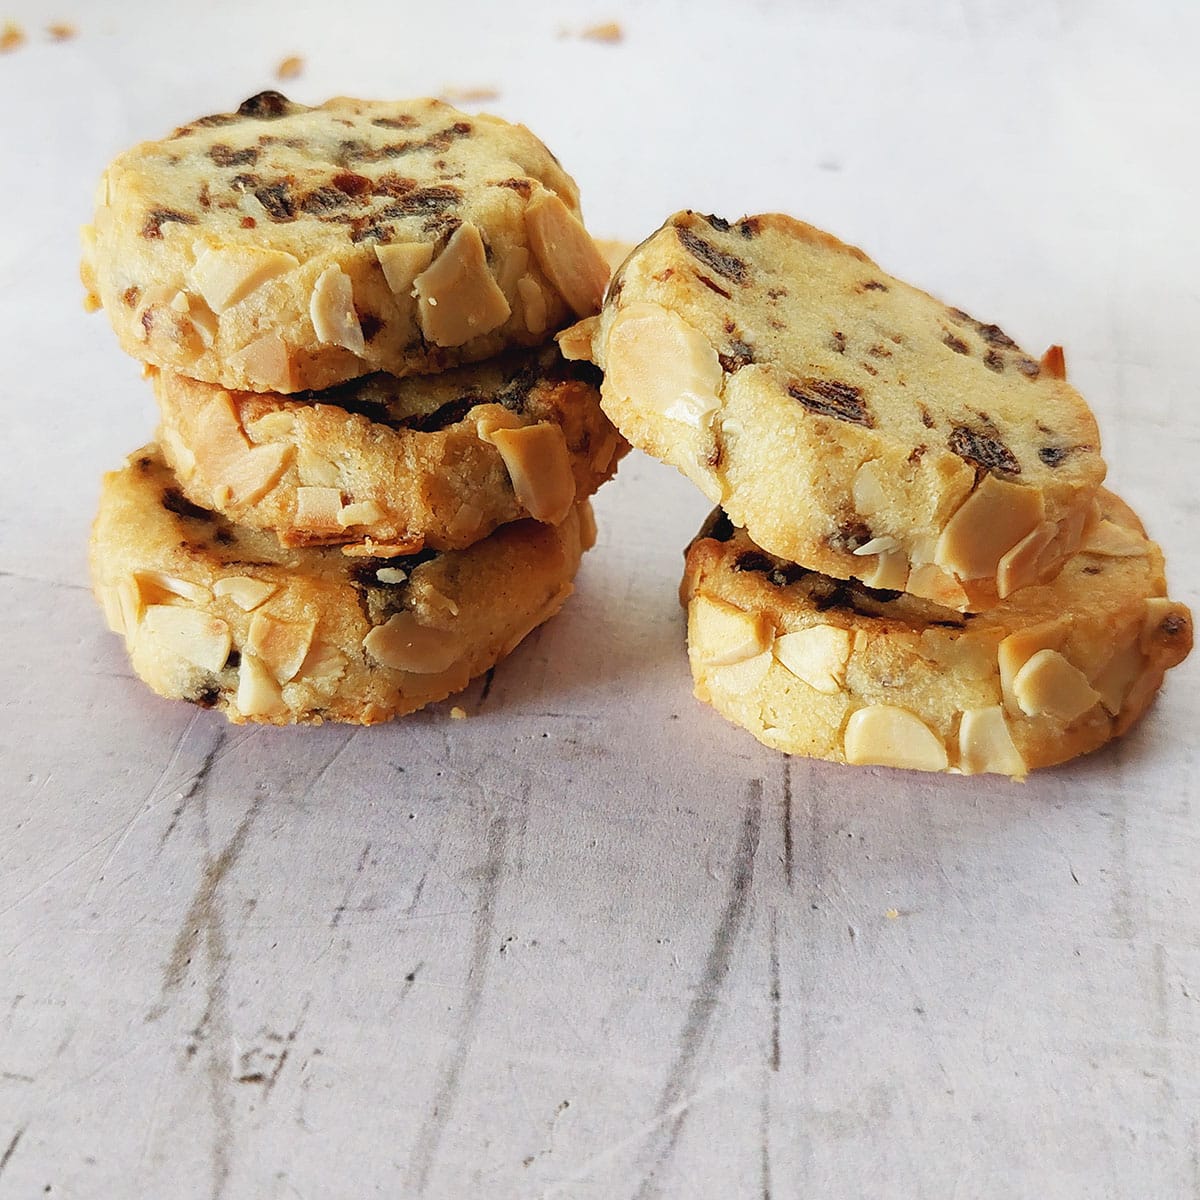 These cookies are super easy to make using just 6 ingredients. Butter, powdered sugar, vanilla extract, dates and almonds are all that's required to make these cookies.